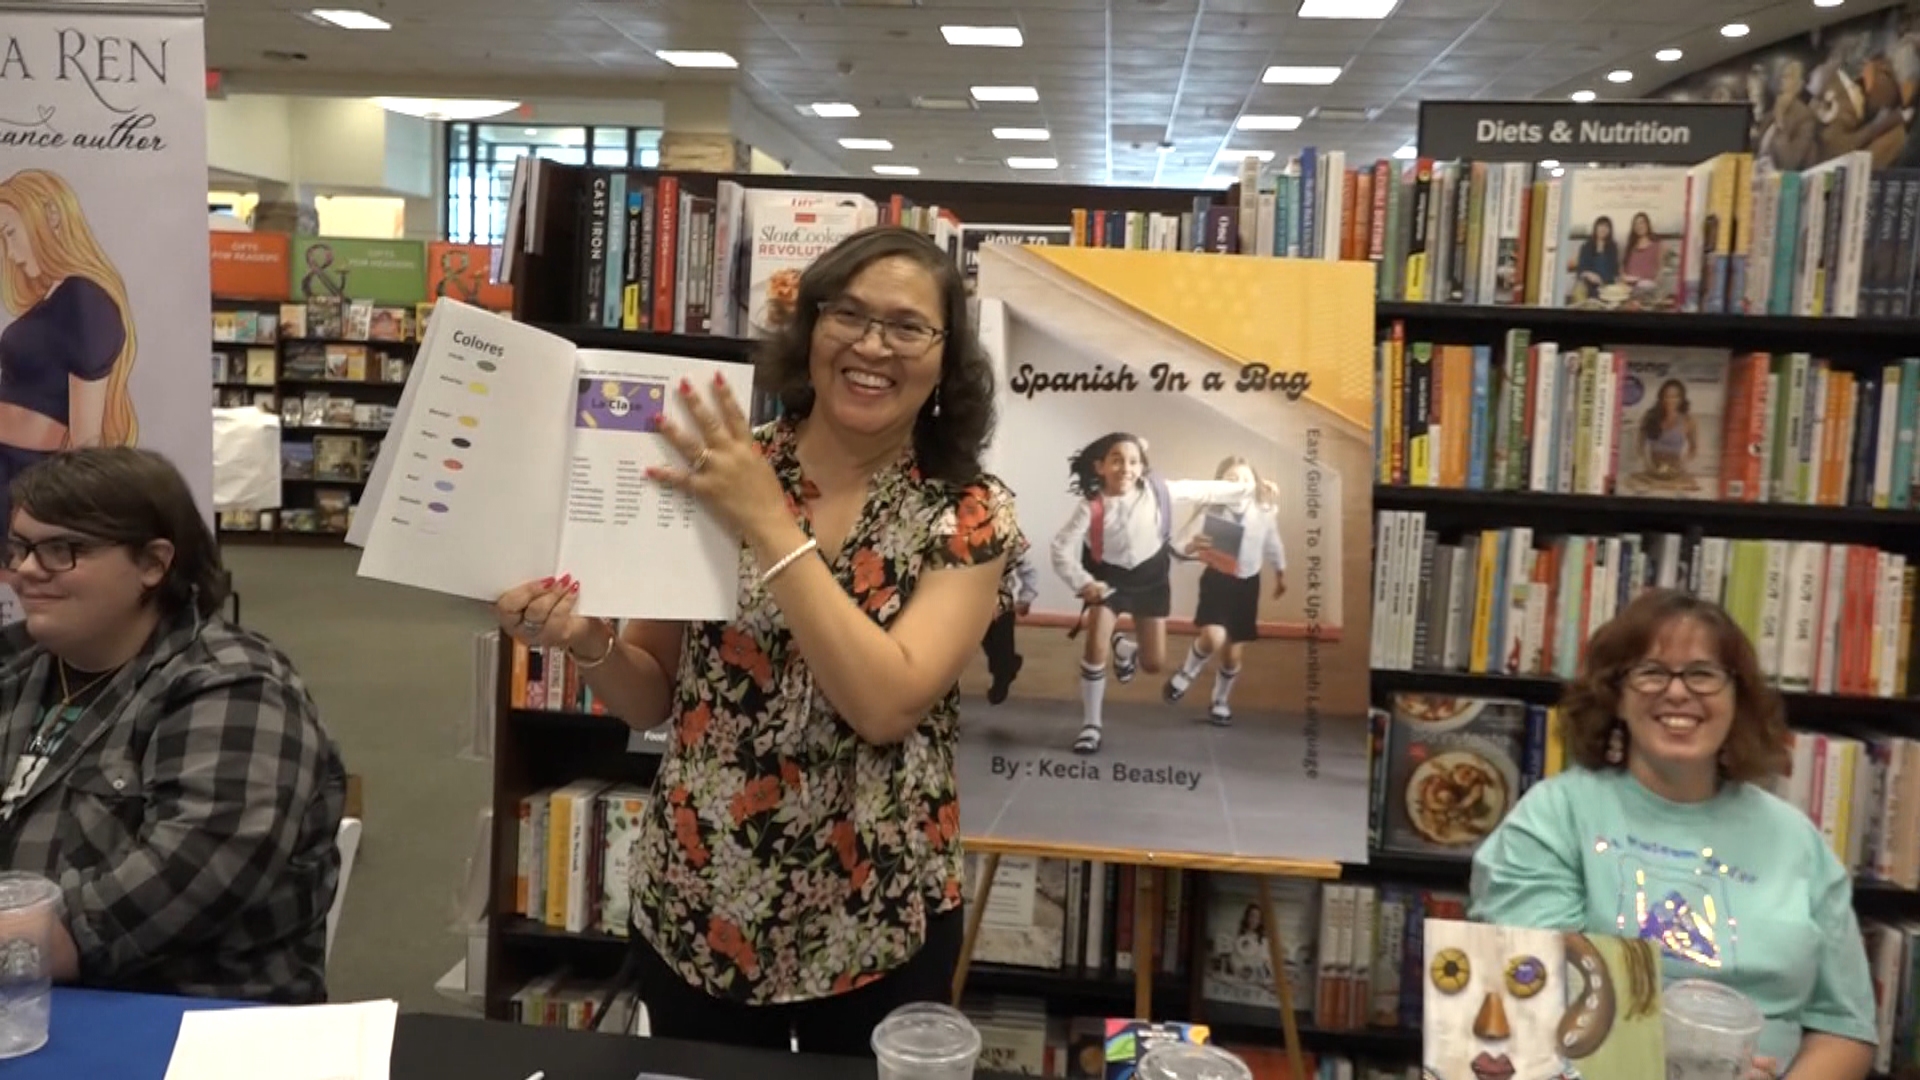 Kecia Beasley, a teacher at The Academies at South Mountain in Phoenix, is now a published author after writing a book aimed at helping people learn Spanish!